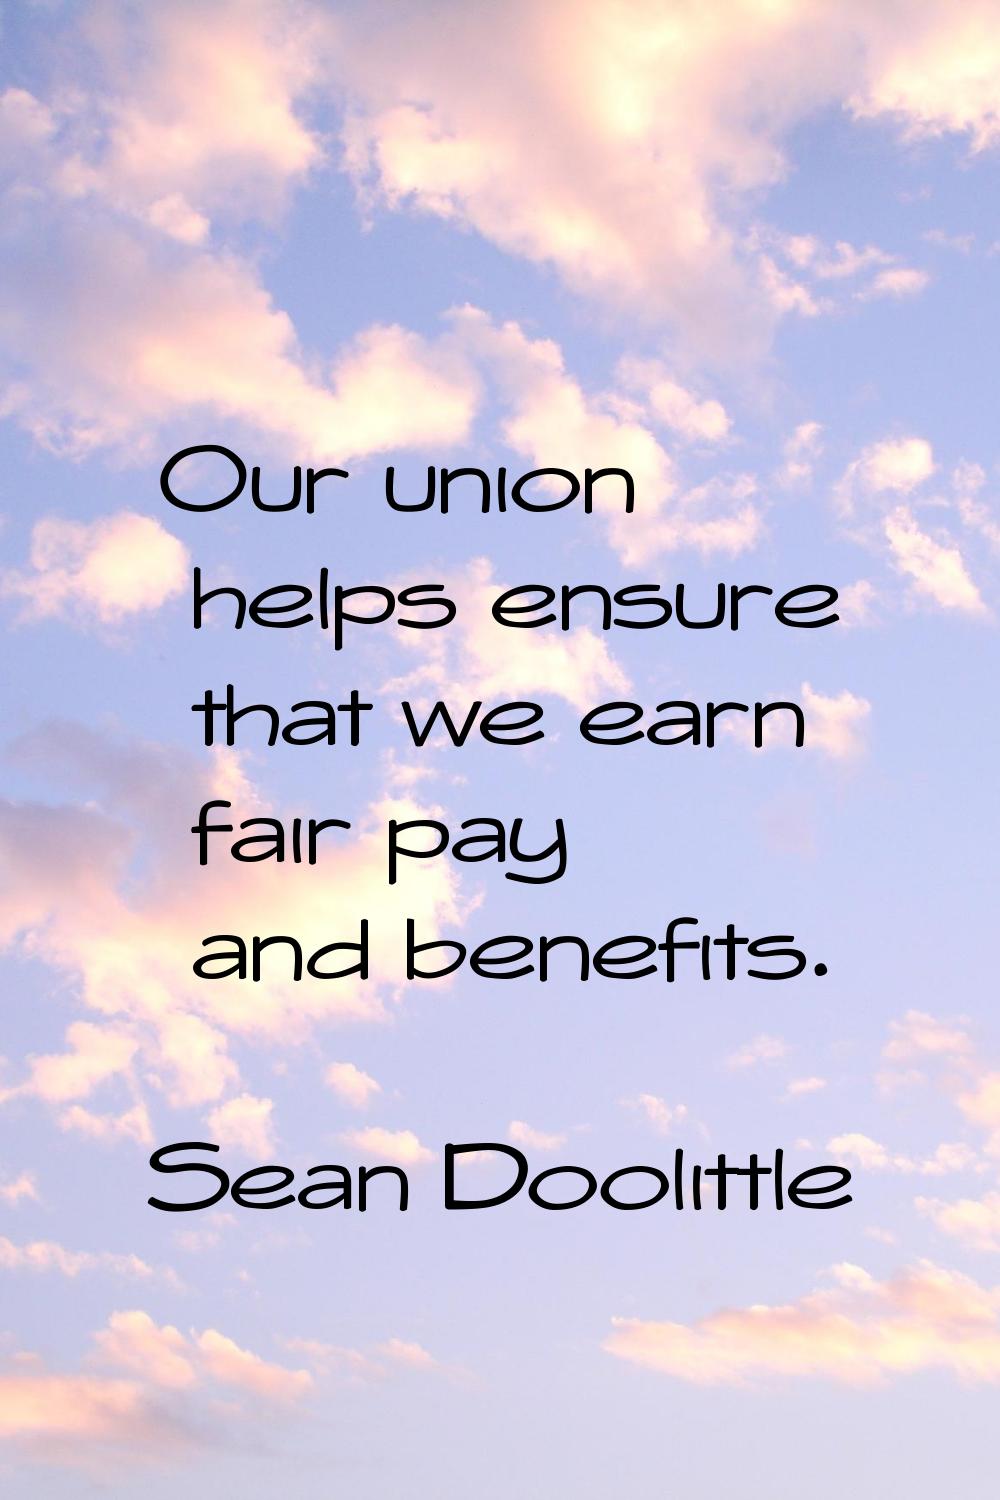 Our union helps ensure that we earn fair pay and benefits.